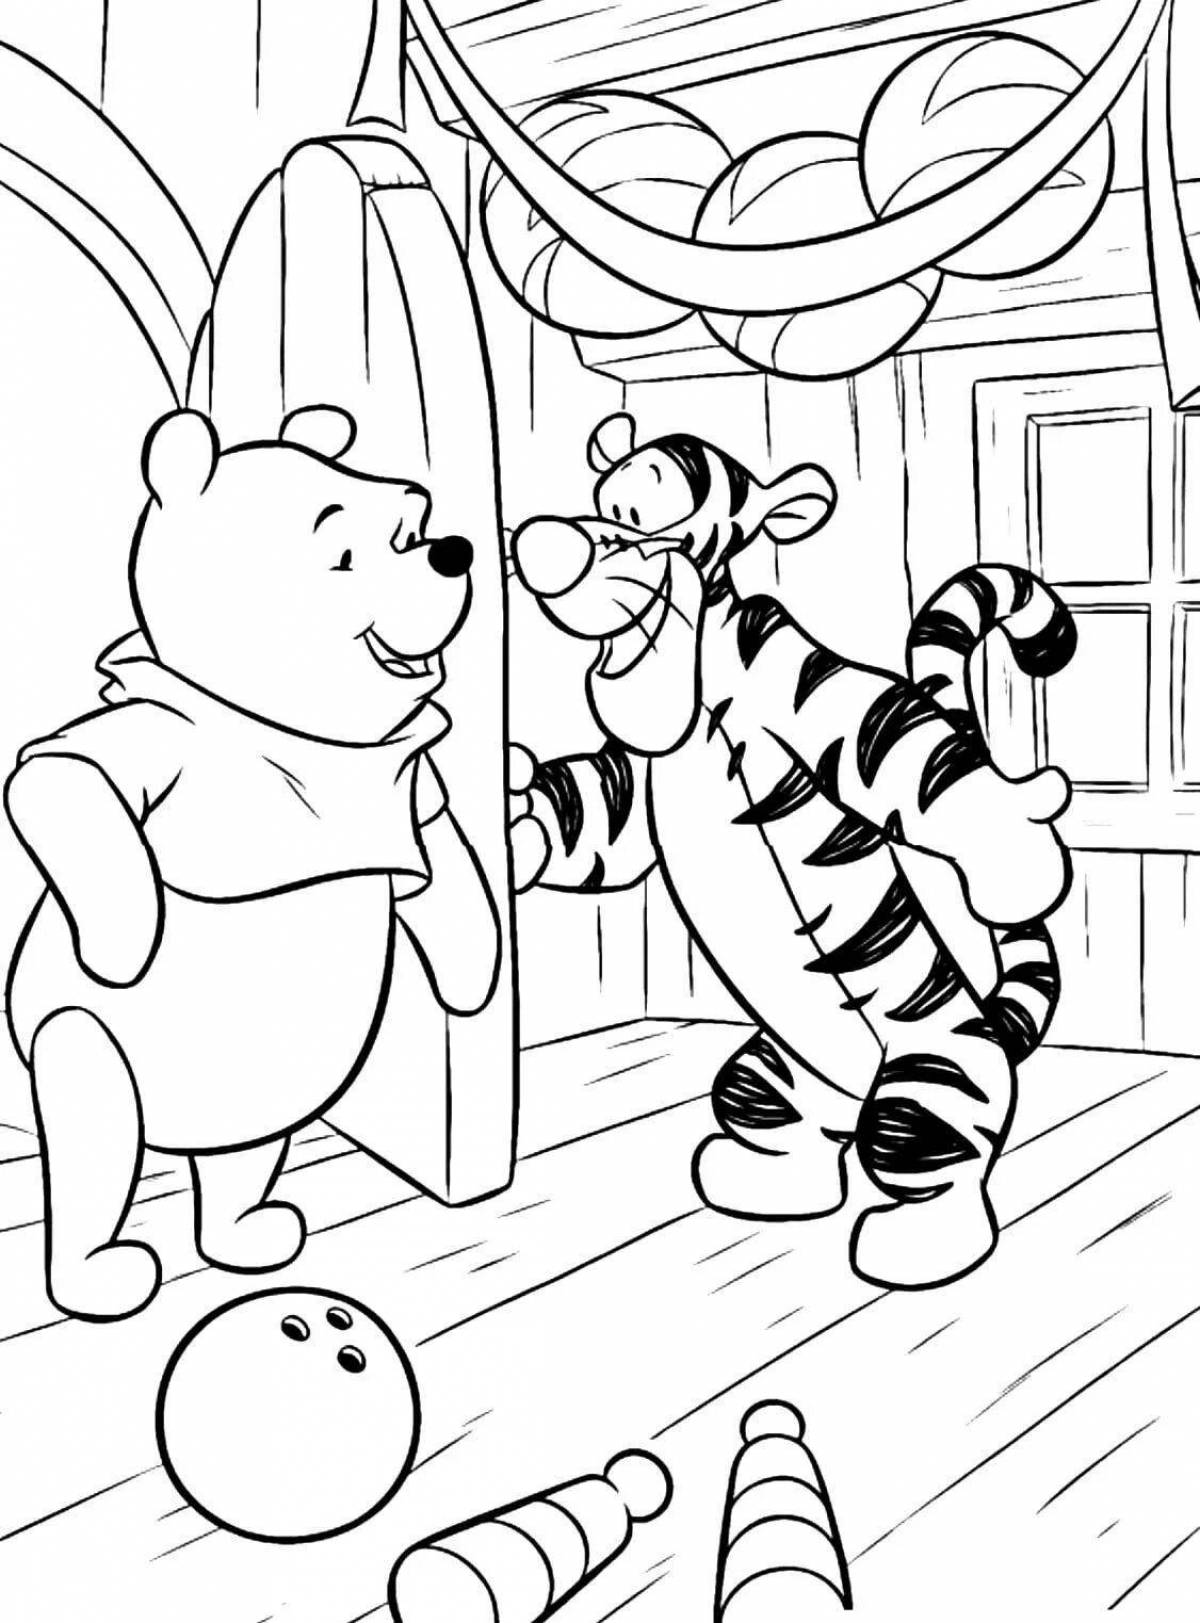 Blissful winnie the pooh coloring book for kids